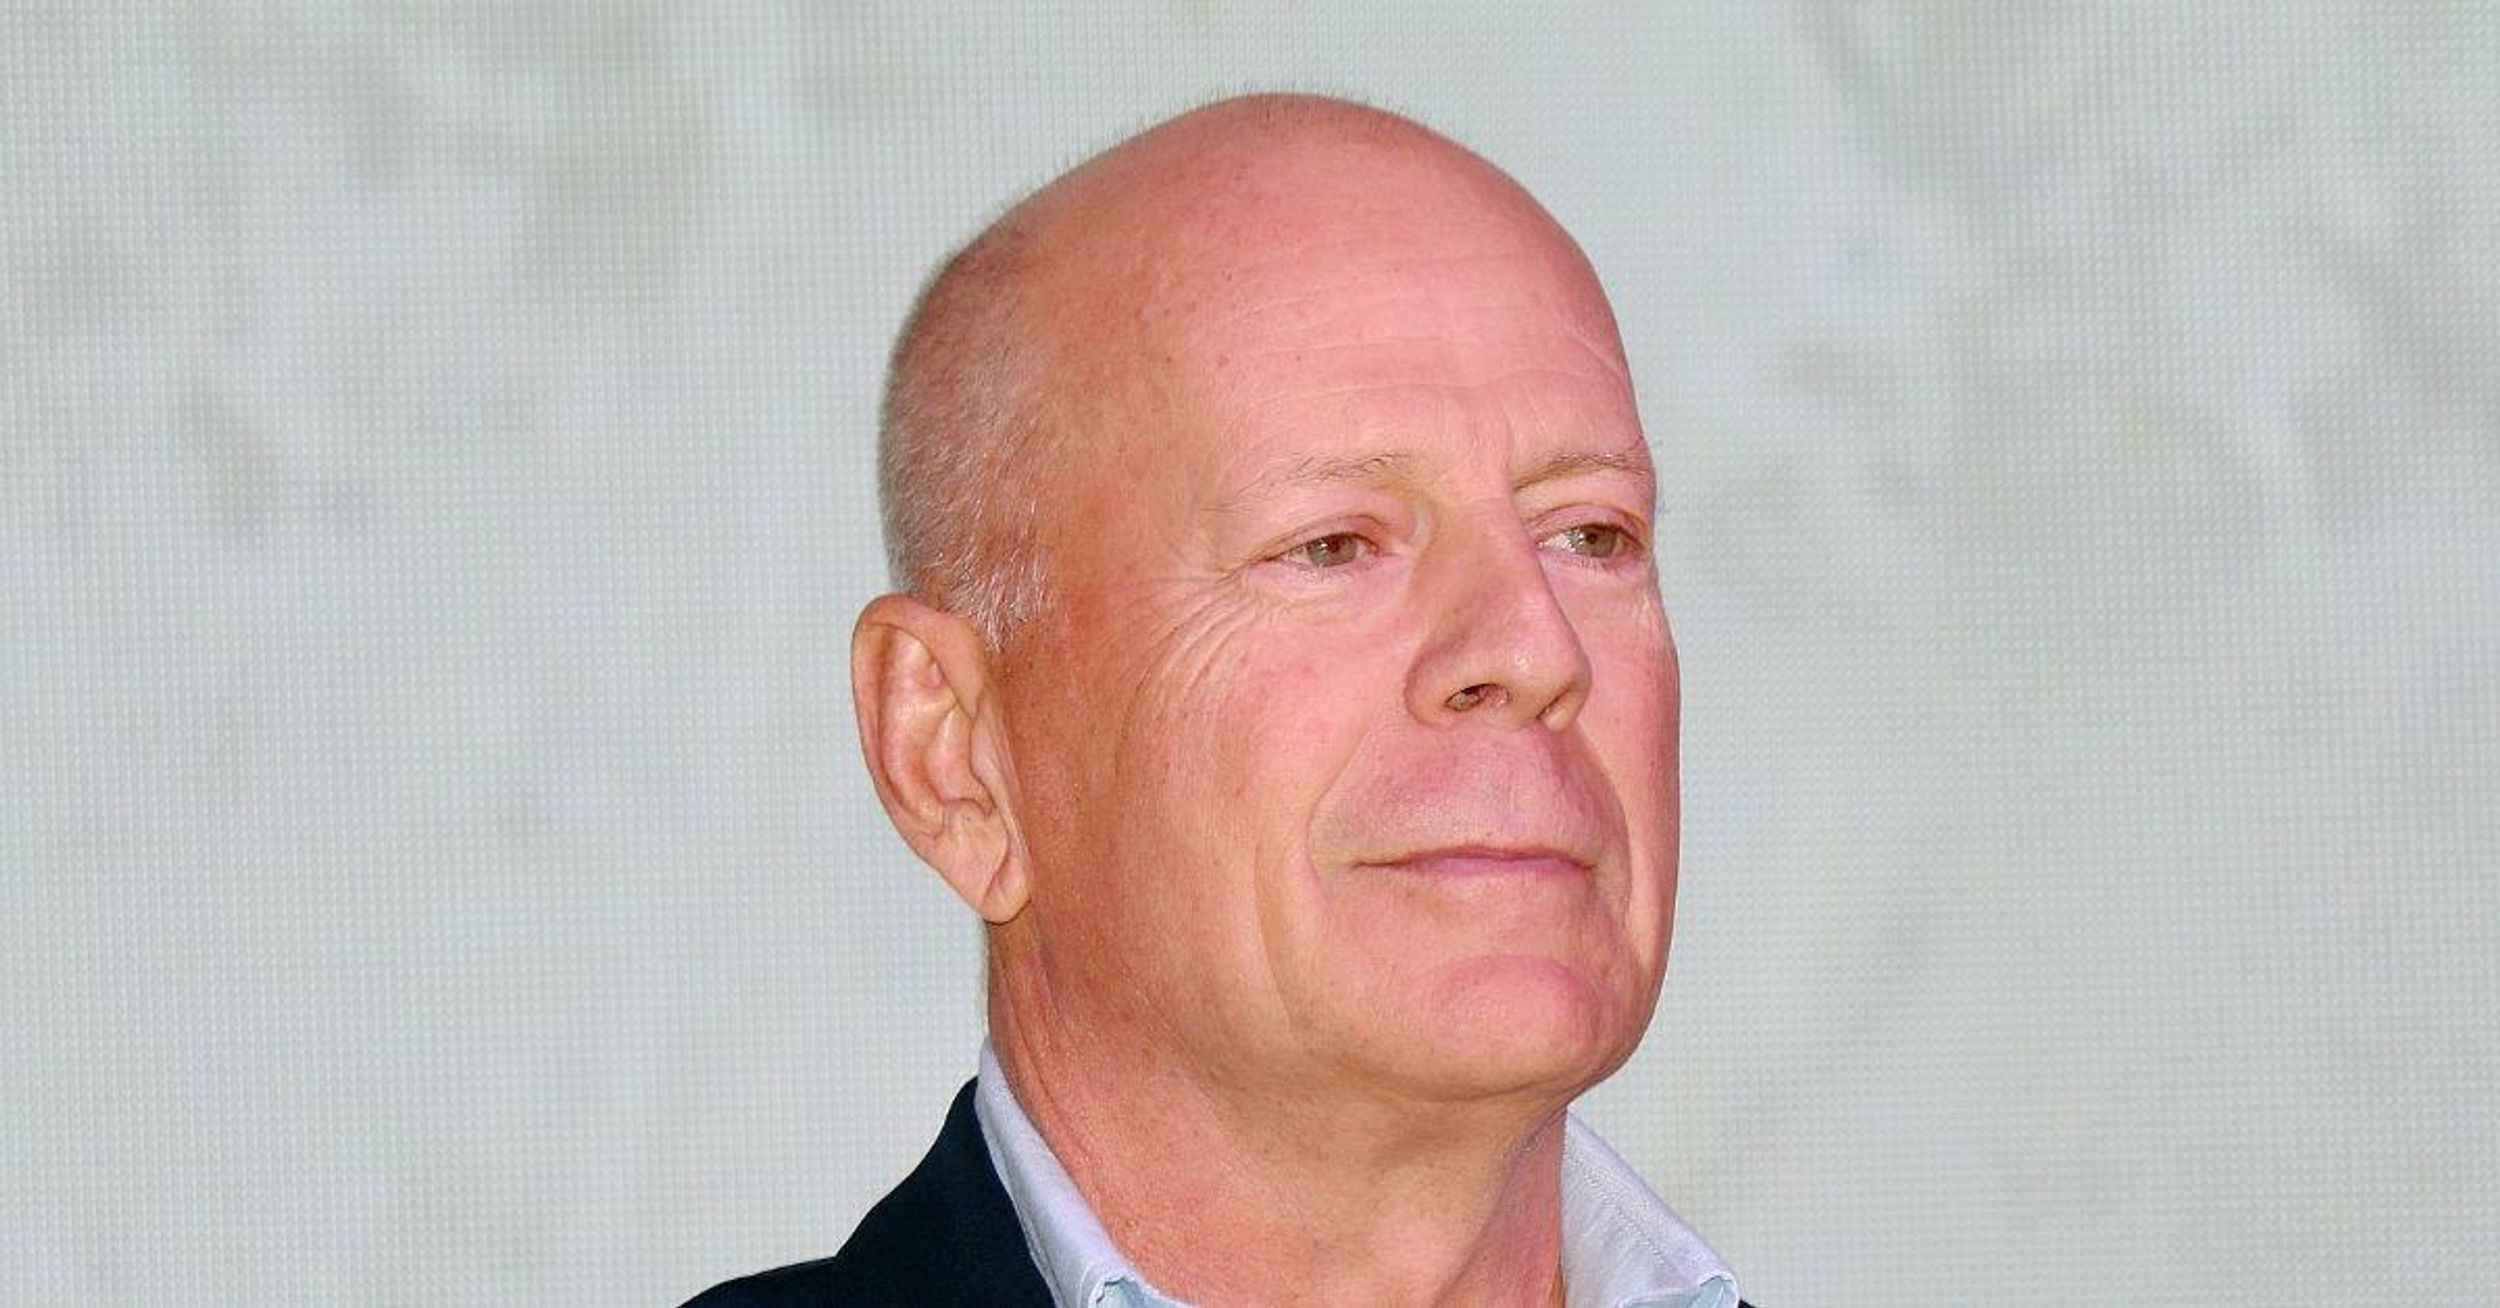 Razzie Awards Apologize And Rescind 'Worst Performance By Bruce Willis' Award After Backlash